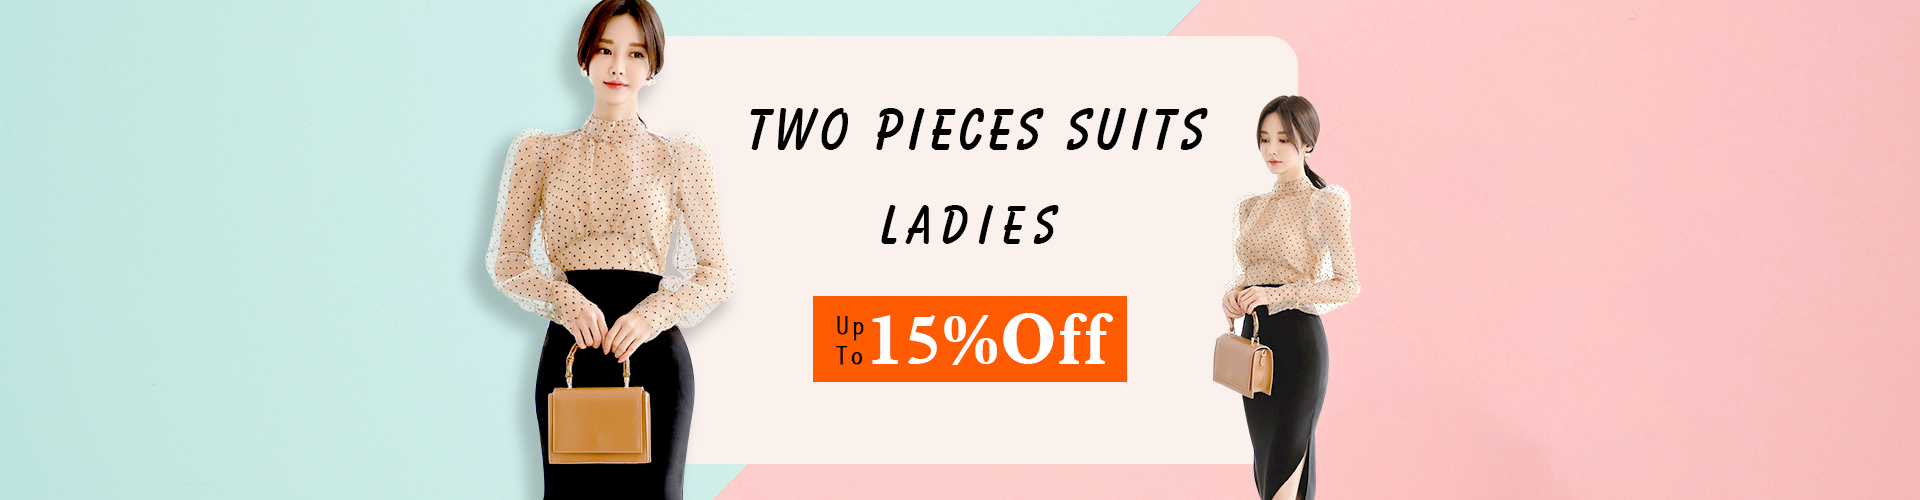 Ladies' Two Pieces Suits